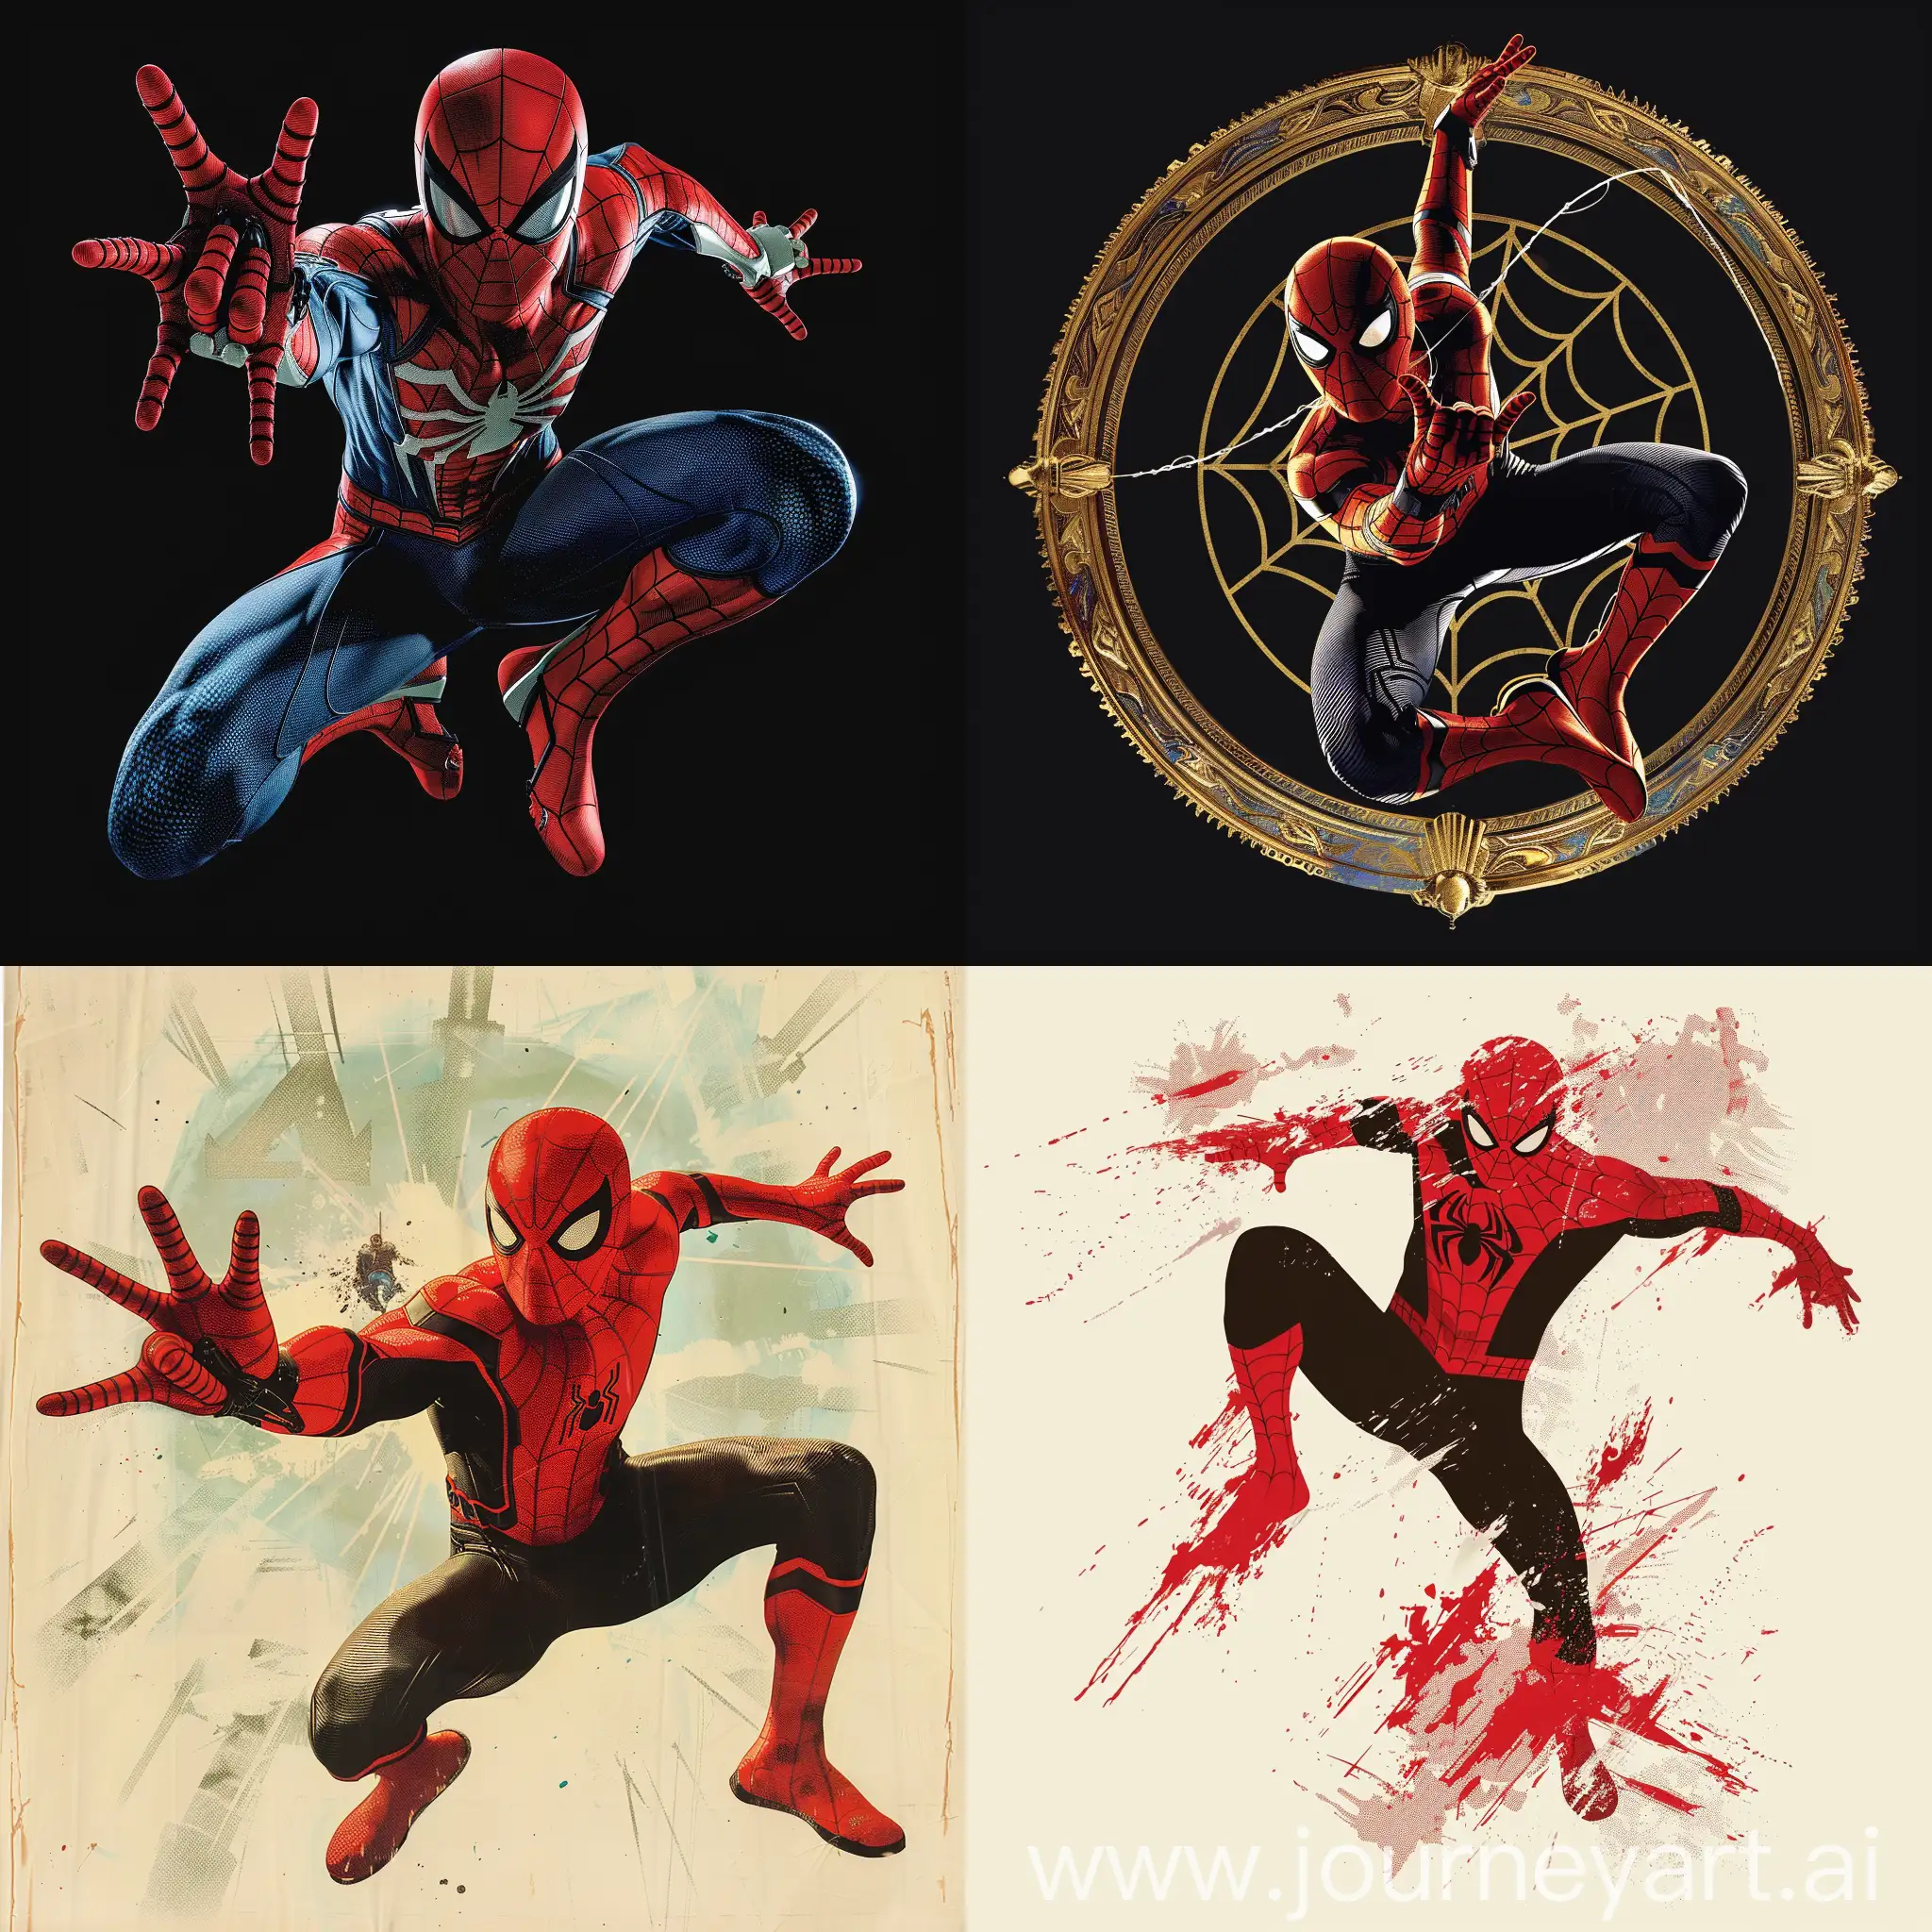 Generate monograms with Spider-Man's movements
